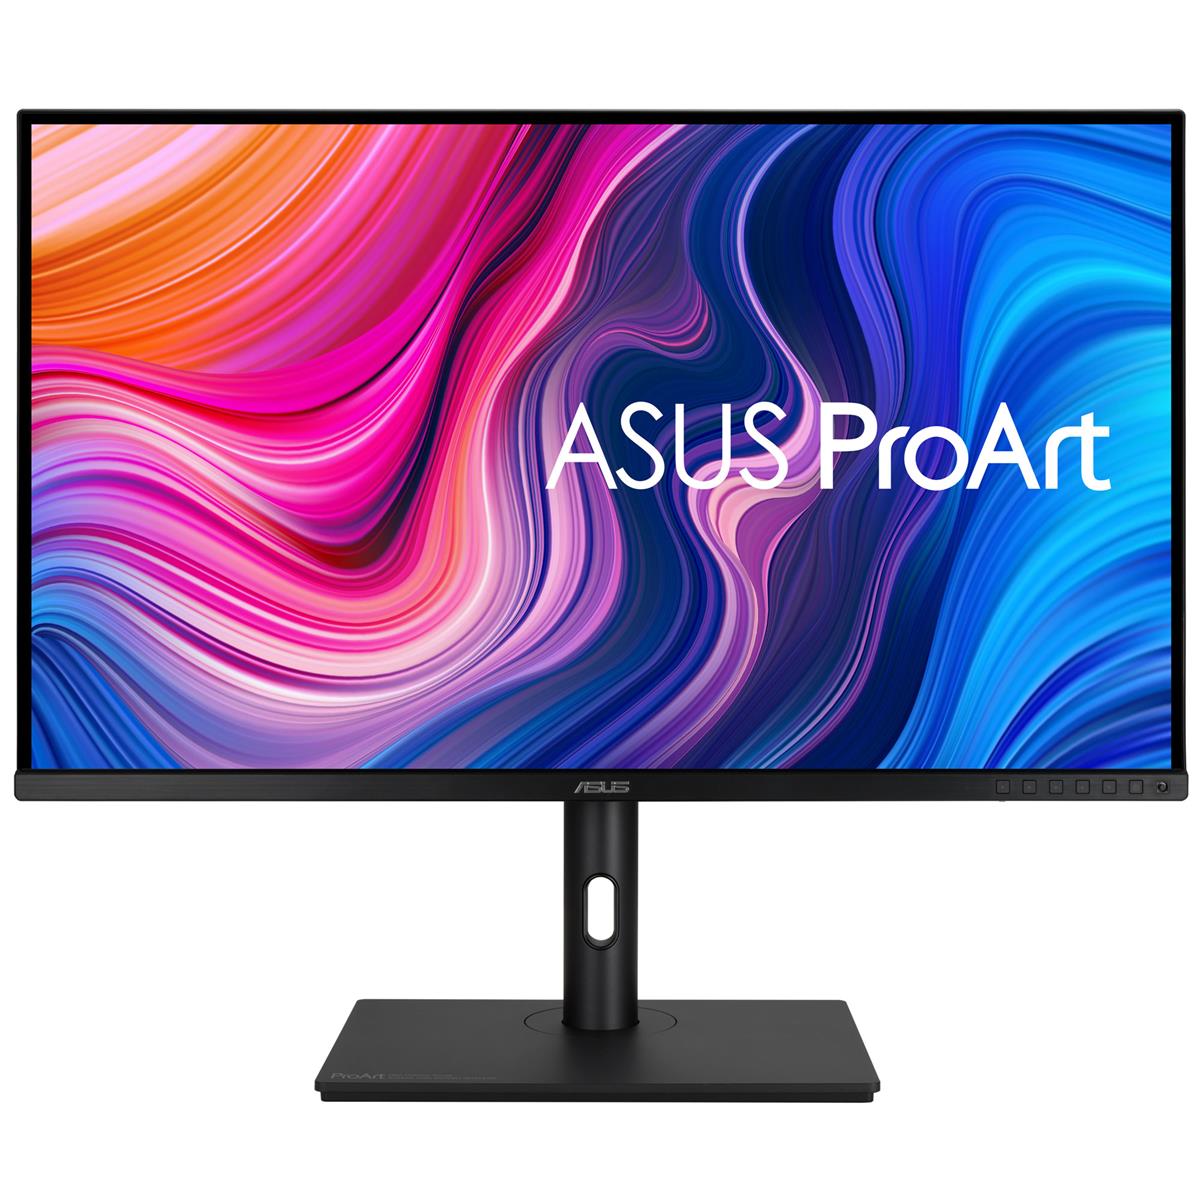 Asus Proart Pa329cv Inch Widescreen HDr UHD Monitor For Sale